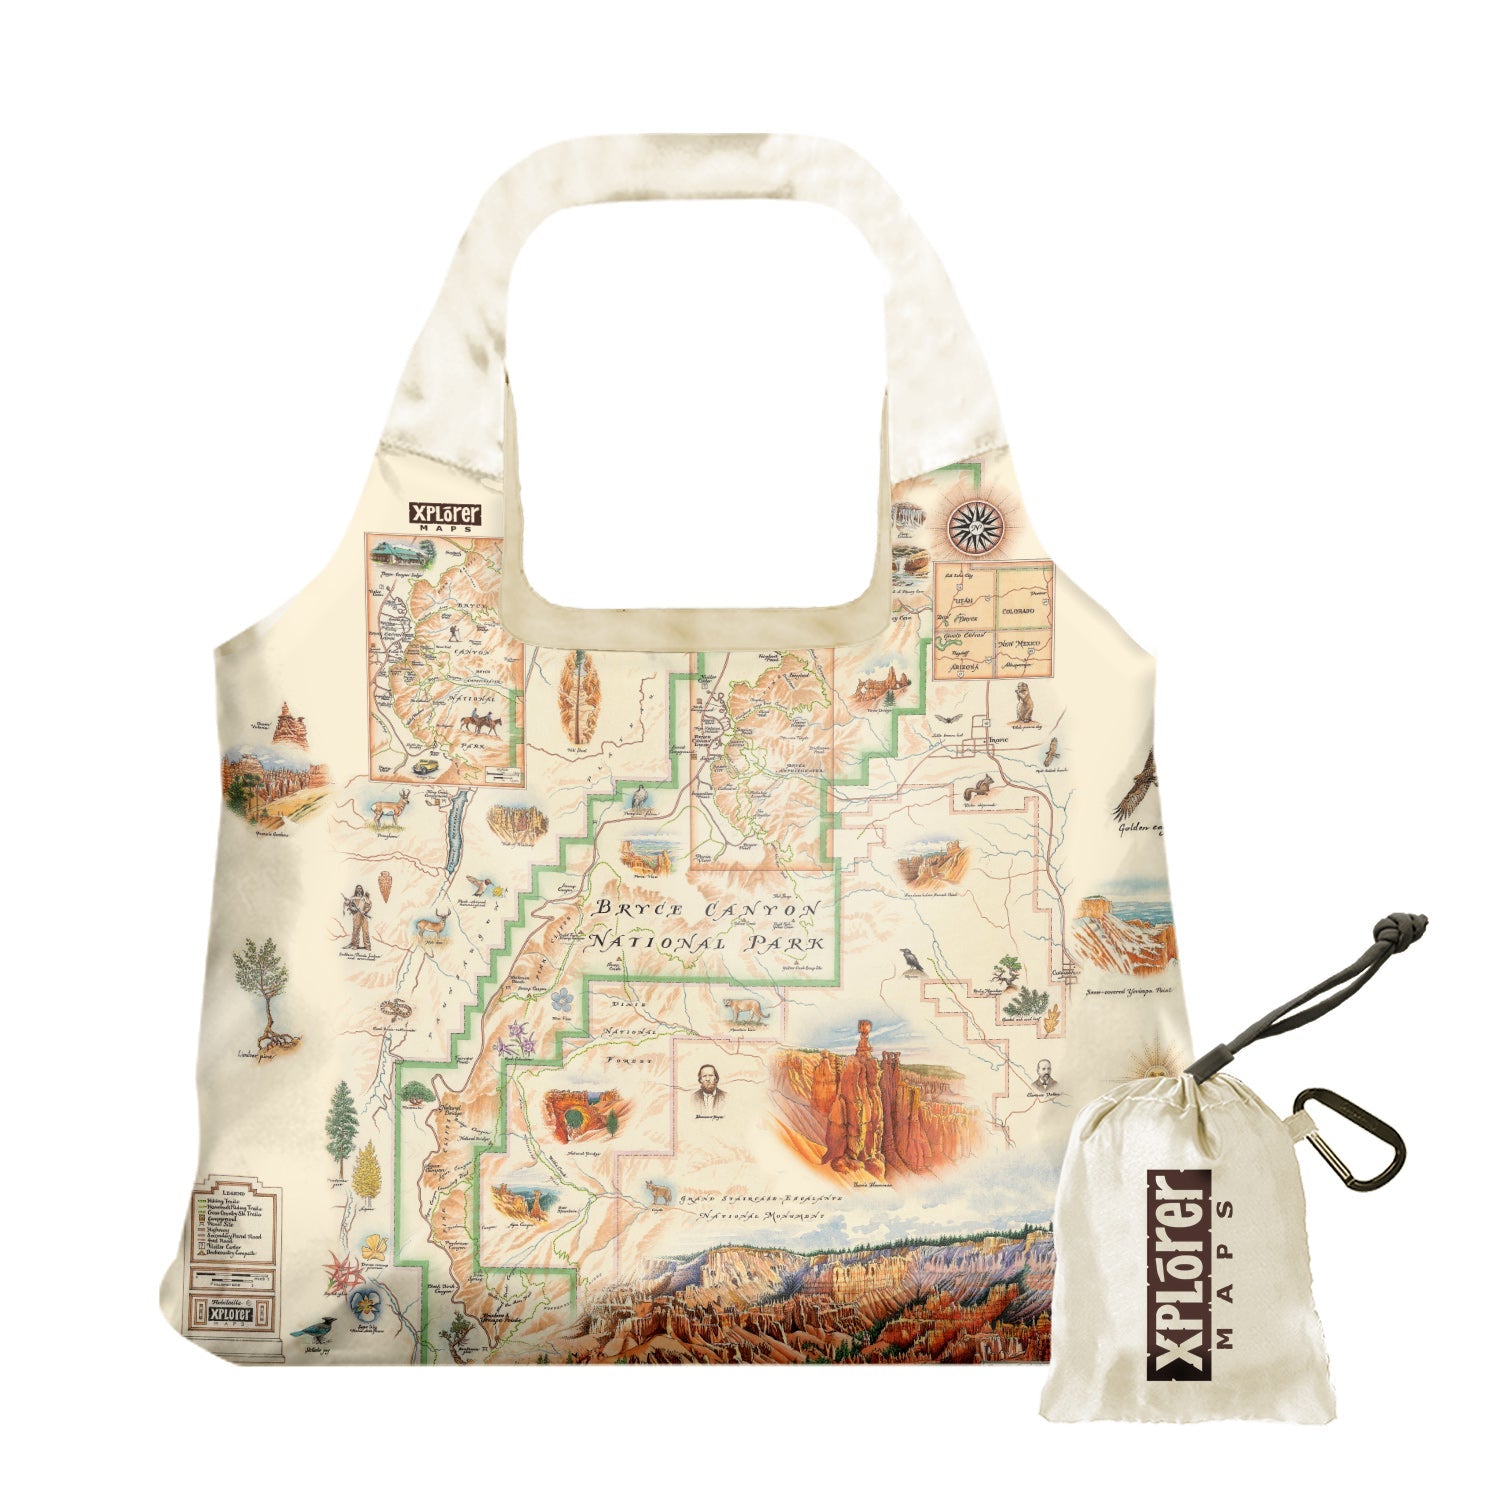 Bryce Canyon National Park Map pouch tote bag  on earth tone colors featuring canyons, horseback, hoodoos, Rim Trail, Sunrise Point, Sunset Point, Inspiration Point and Bryce Point.